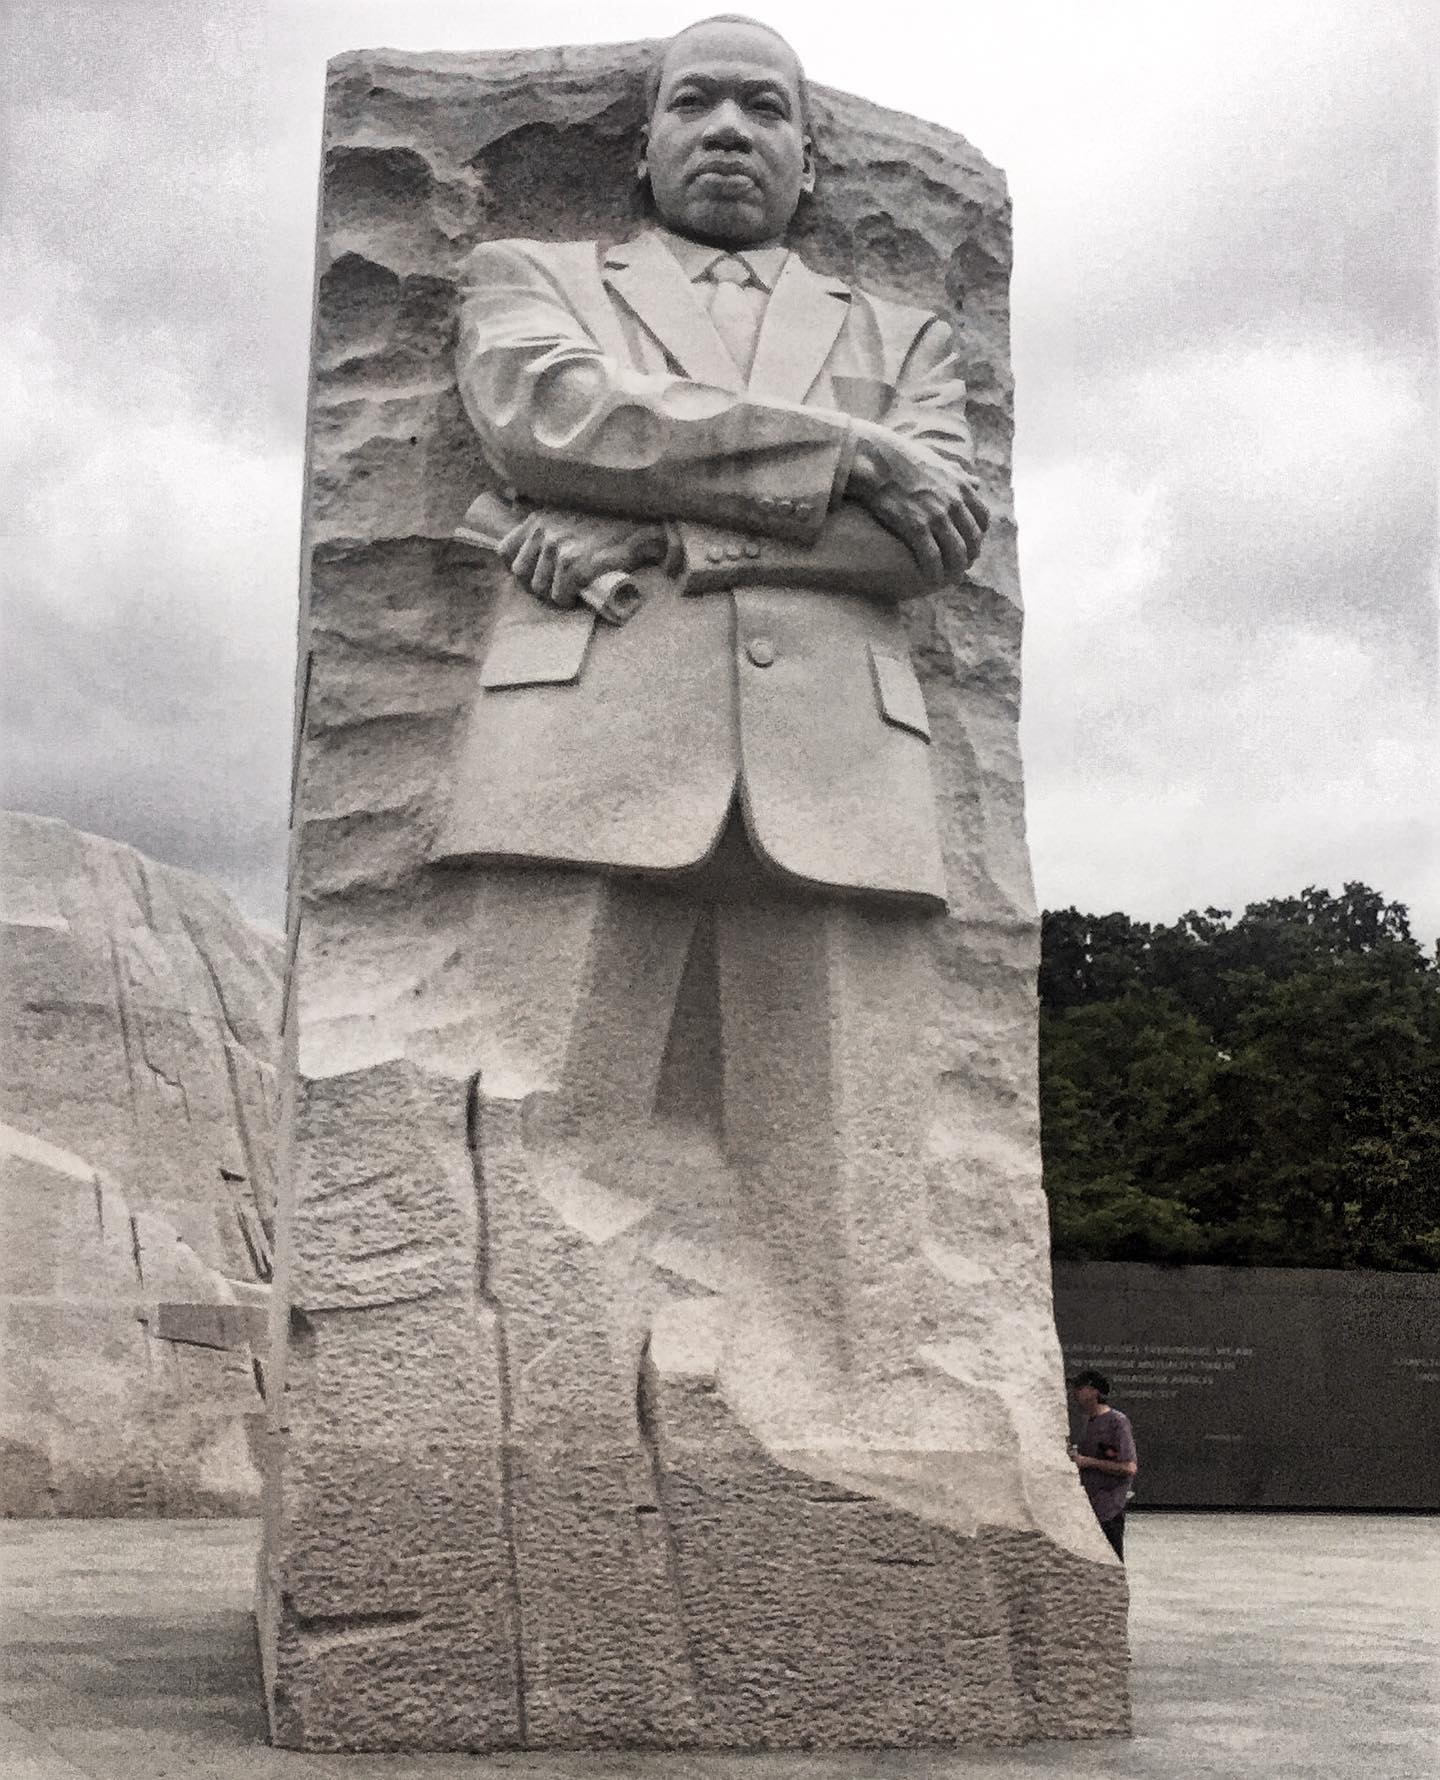 Martin Luther King, Jr. Memorial, Washington D.C.

"Darkness cannot drive out darkness; only light can do that. Hate cannot drive out hate; only love can do that." 
- Martin Luther King, Jr. -

#usa #us #unitedstates #unitedstatesofamerica #america #dc #washingtondc #martinlutherkingjr #martinlutherkingmemorial #wehaveadream #history #americanhistory #potomacpark #stoneofhope #nationalmall #civilrights #civilrightsmovement #tidalbasin #heavenlybirthday #pictureoftheday #remember #mlk #mlkjr #equality #leadership